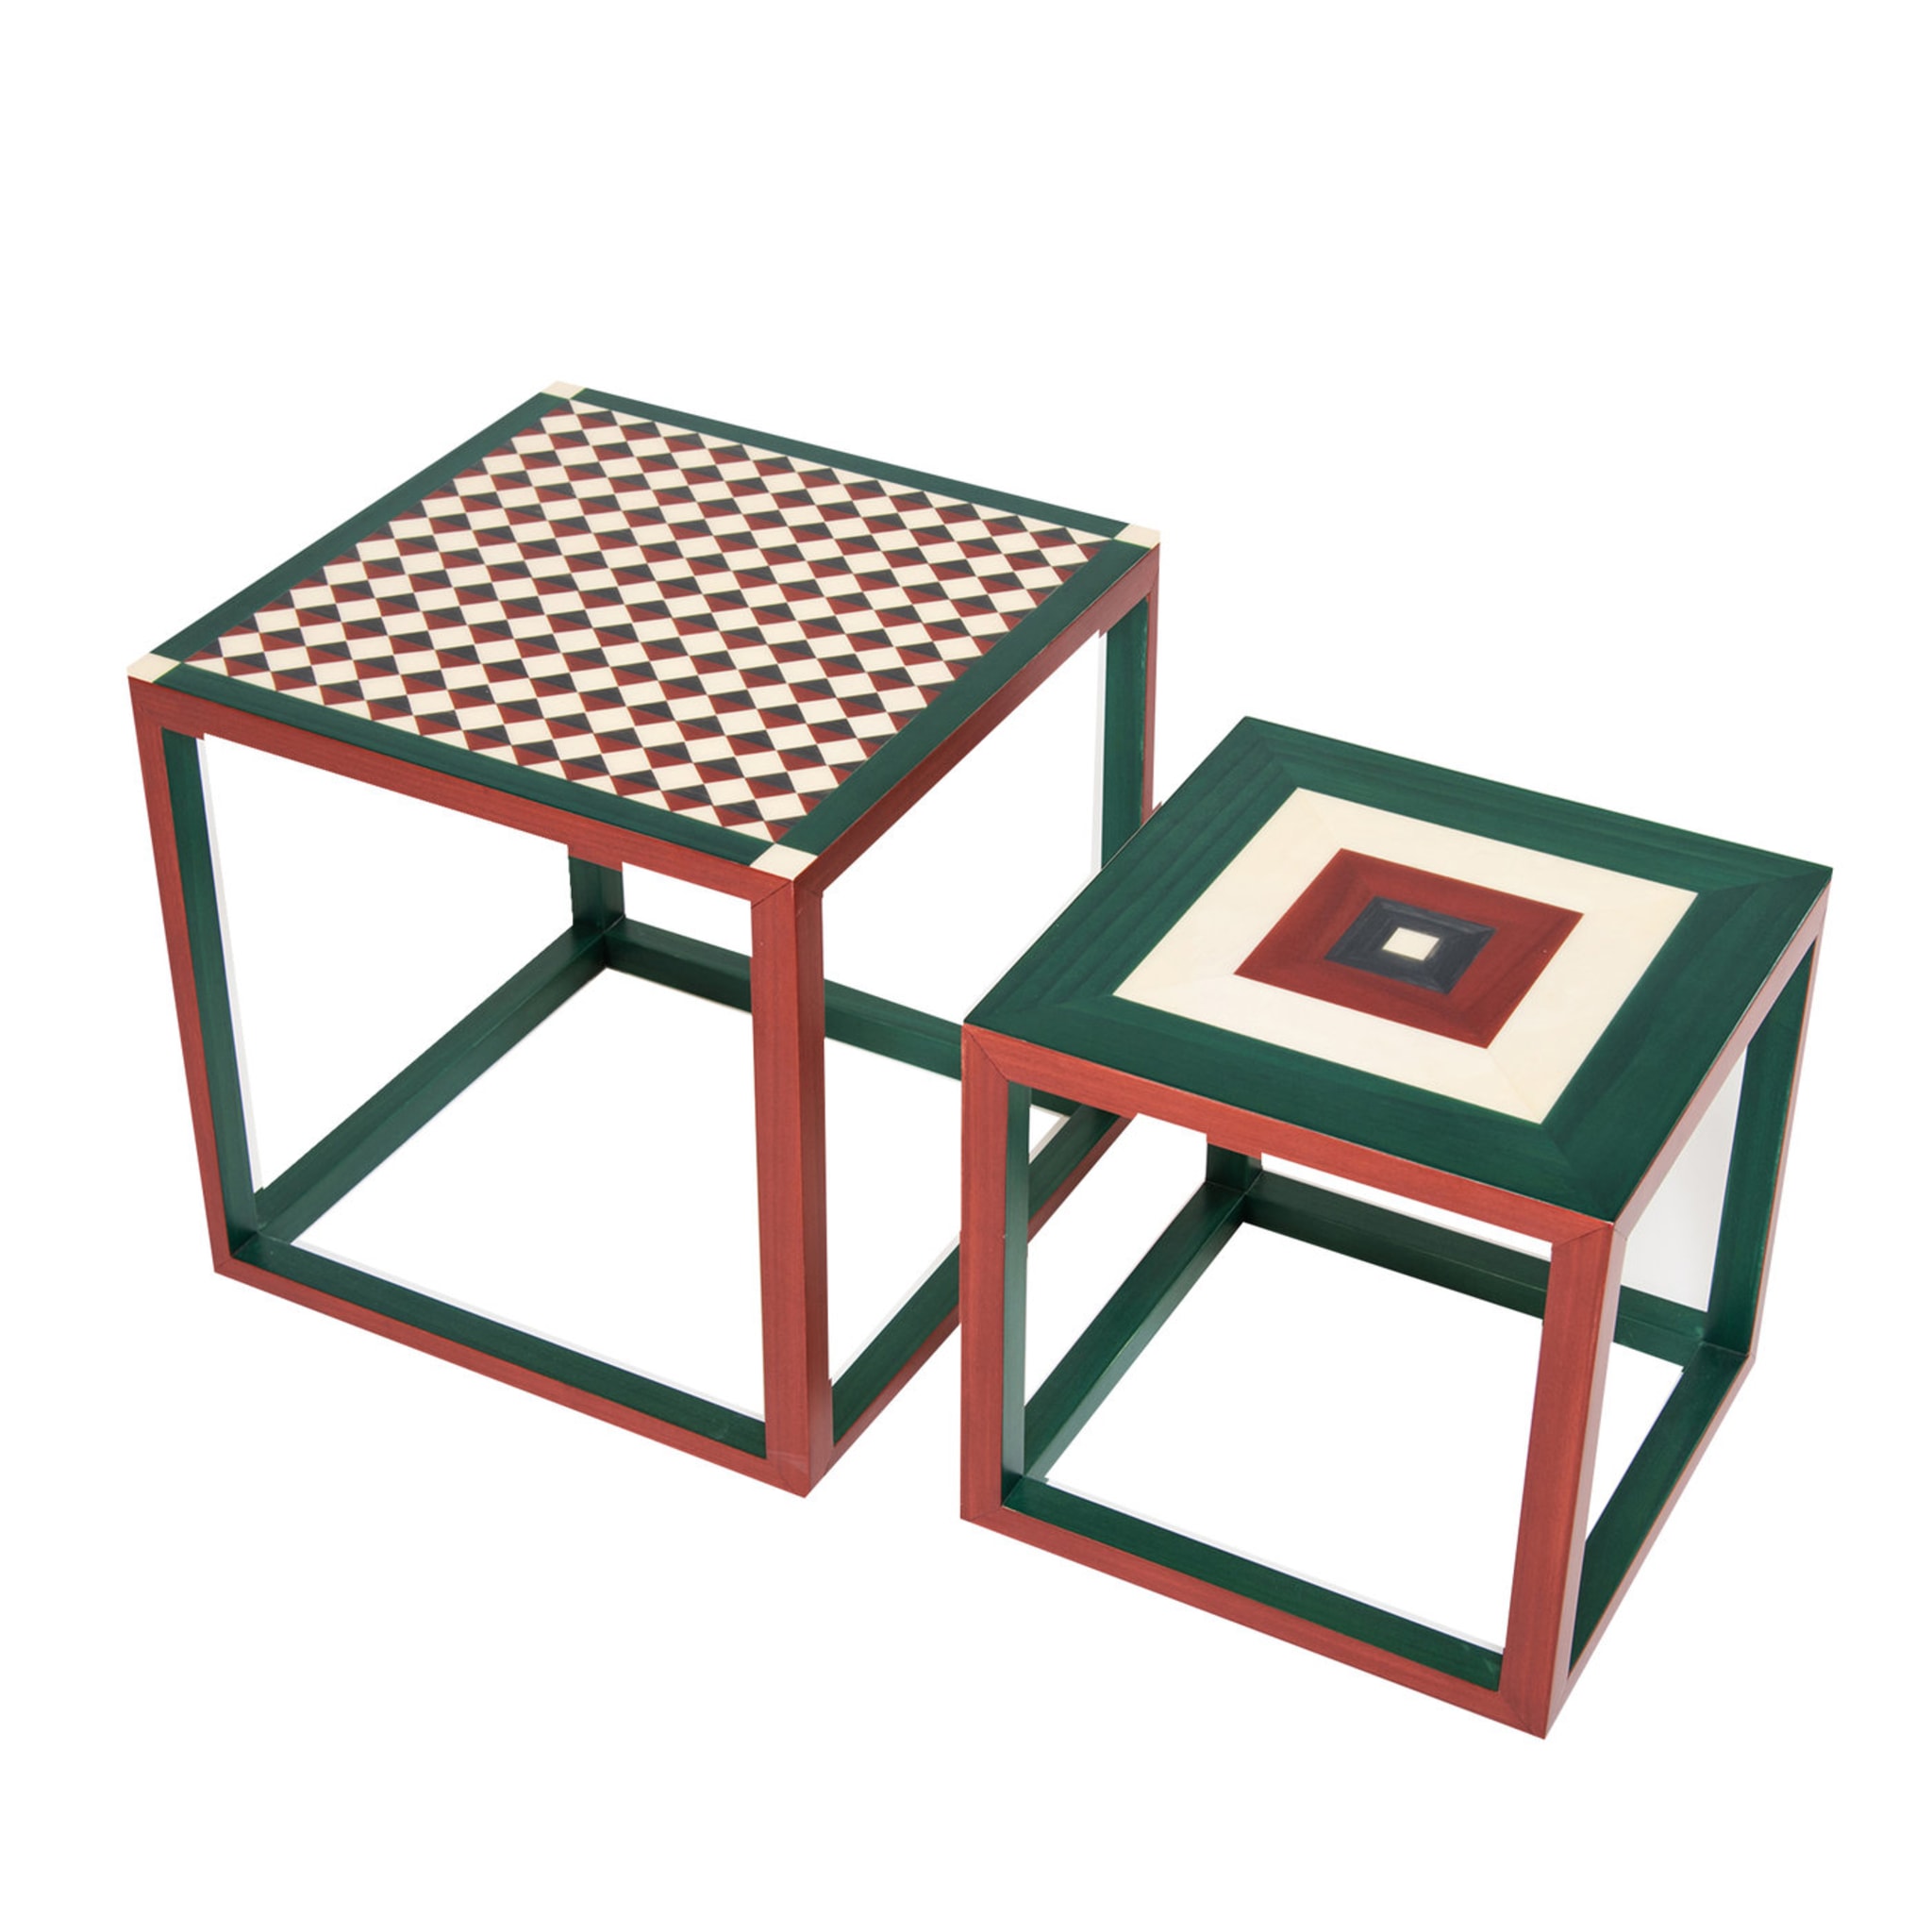 Partenope Green and Red Squares Set of 2 Nesting Tables - Main view